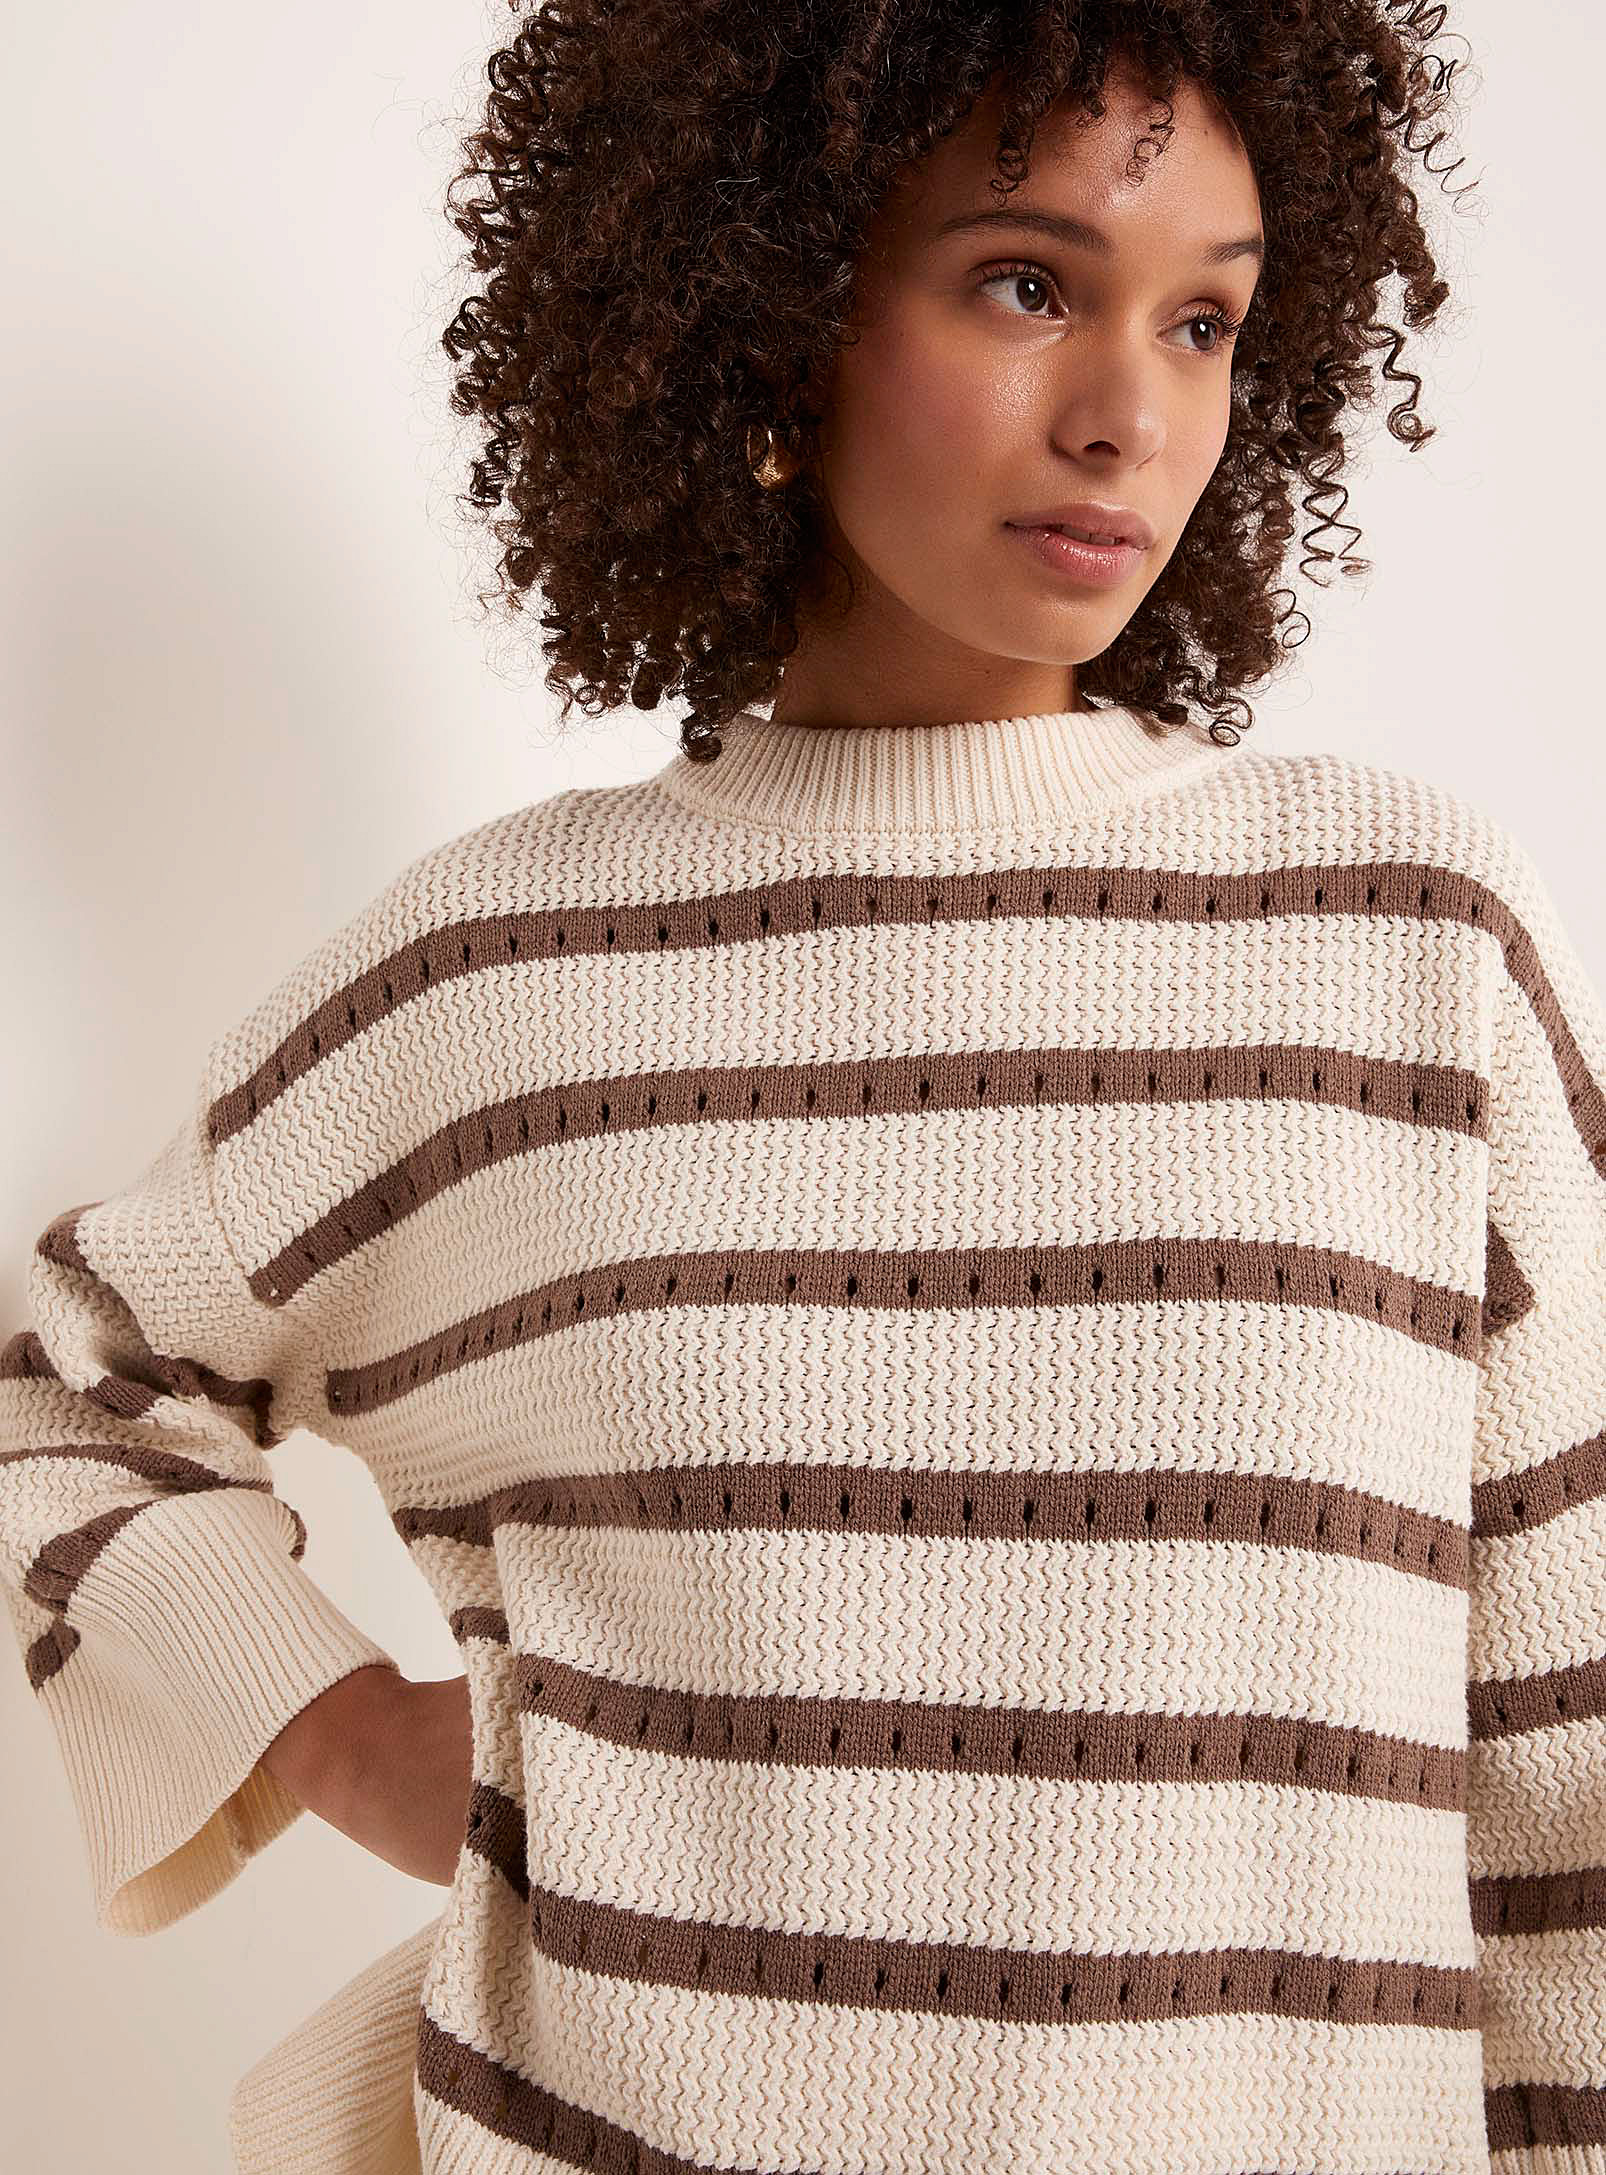 Soaked Luxury - Women's Ravalina stripes and textures sweater